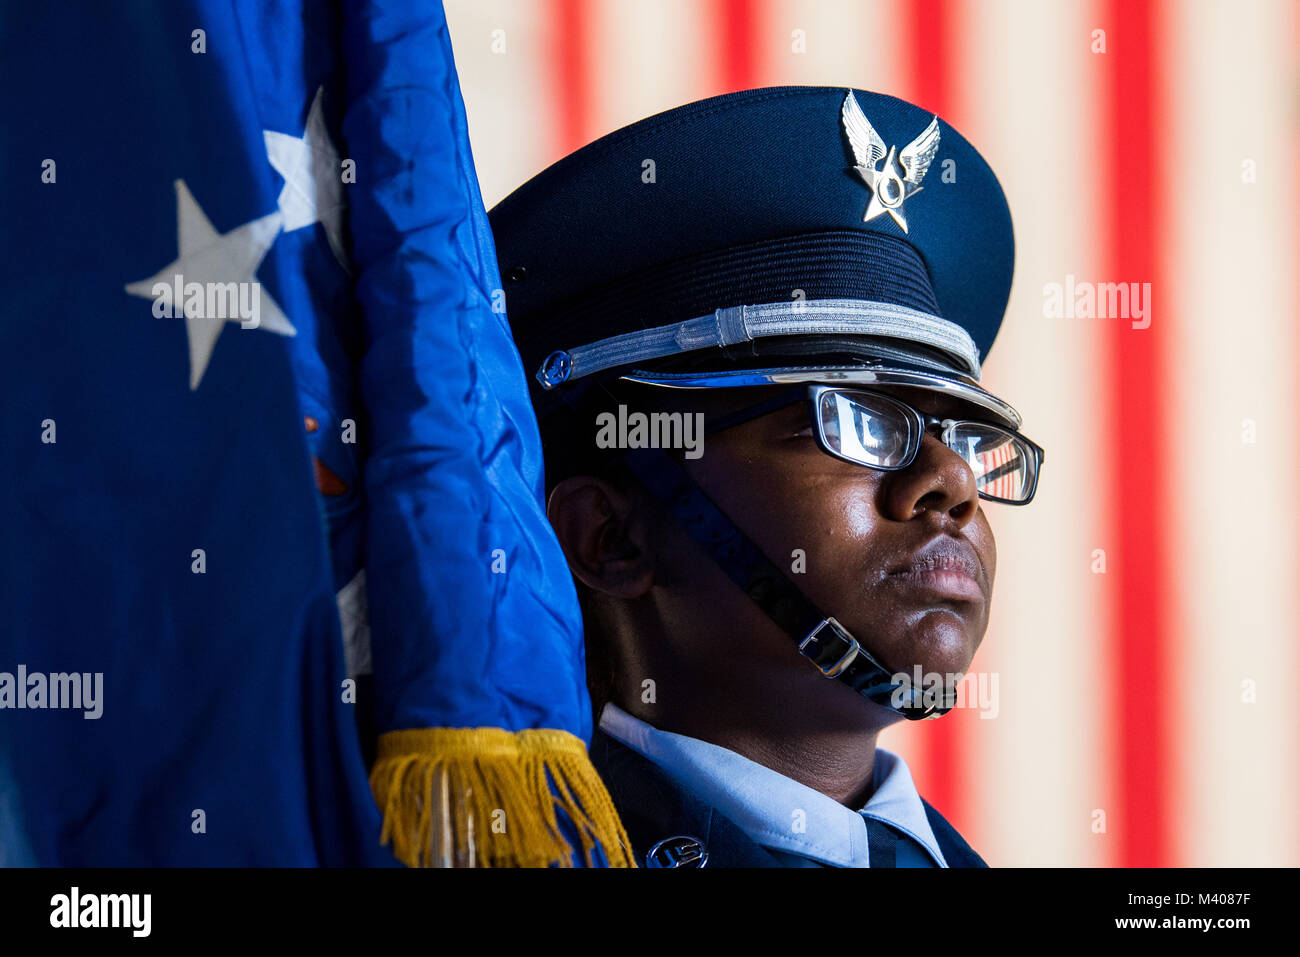 Airman 1st Class Myshanique Jones a member of the Travis Air Force Base Honor Guard holds the Air Force flag during the 75th Anniversary kickoff celebration at Travis AFB, Calif., Feb. 8, 2018. The celebration featured the inaugural unveiling of the 75th Anniversary logo on a C-17 Globemaster III. Travis is celebrating 75 years as a major strategic logistics hub for the Pacific and integral part of global power projection for the total force. (U.S. Air Force photo by Master Sgt. Joey Swafford) Stock Photo